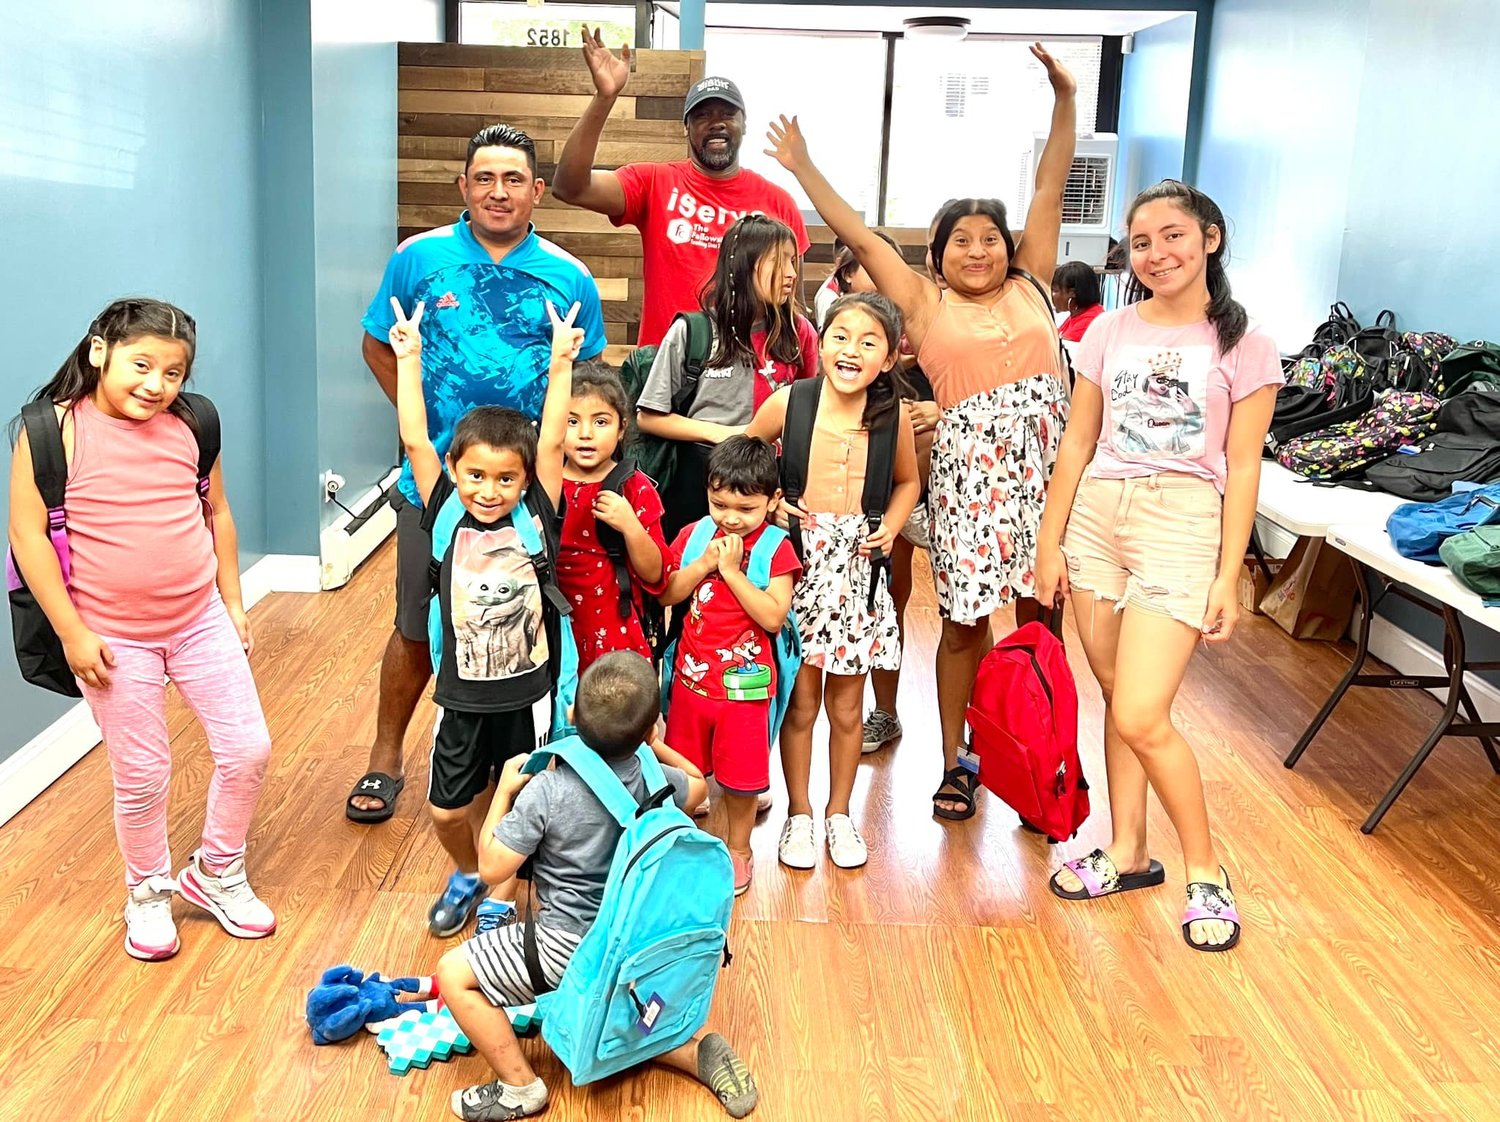 The Rev. Tobias Hall, waving at back right, founder and senior pastor of the Fellowship Center, gave away more than 100 donated backpacks to Baldwin schoolchildren last Saturday.